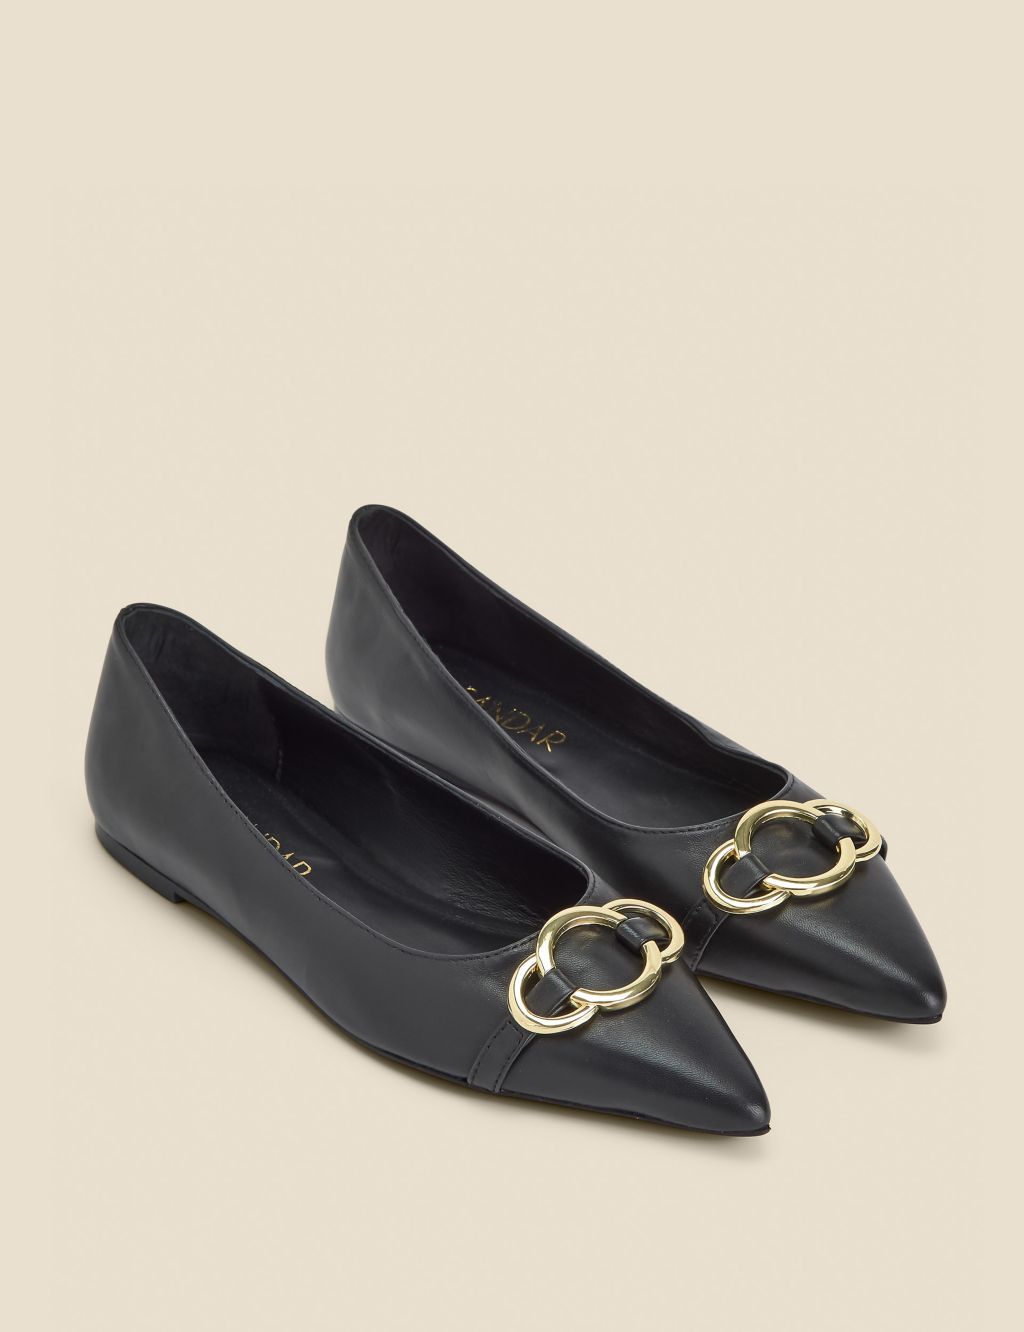 Leather Trim Flat Pointed Pumps 1 of 4